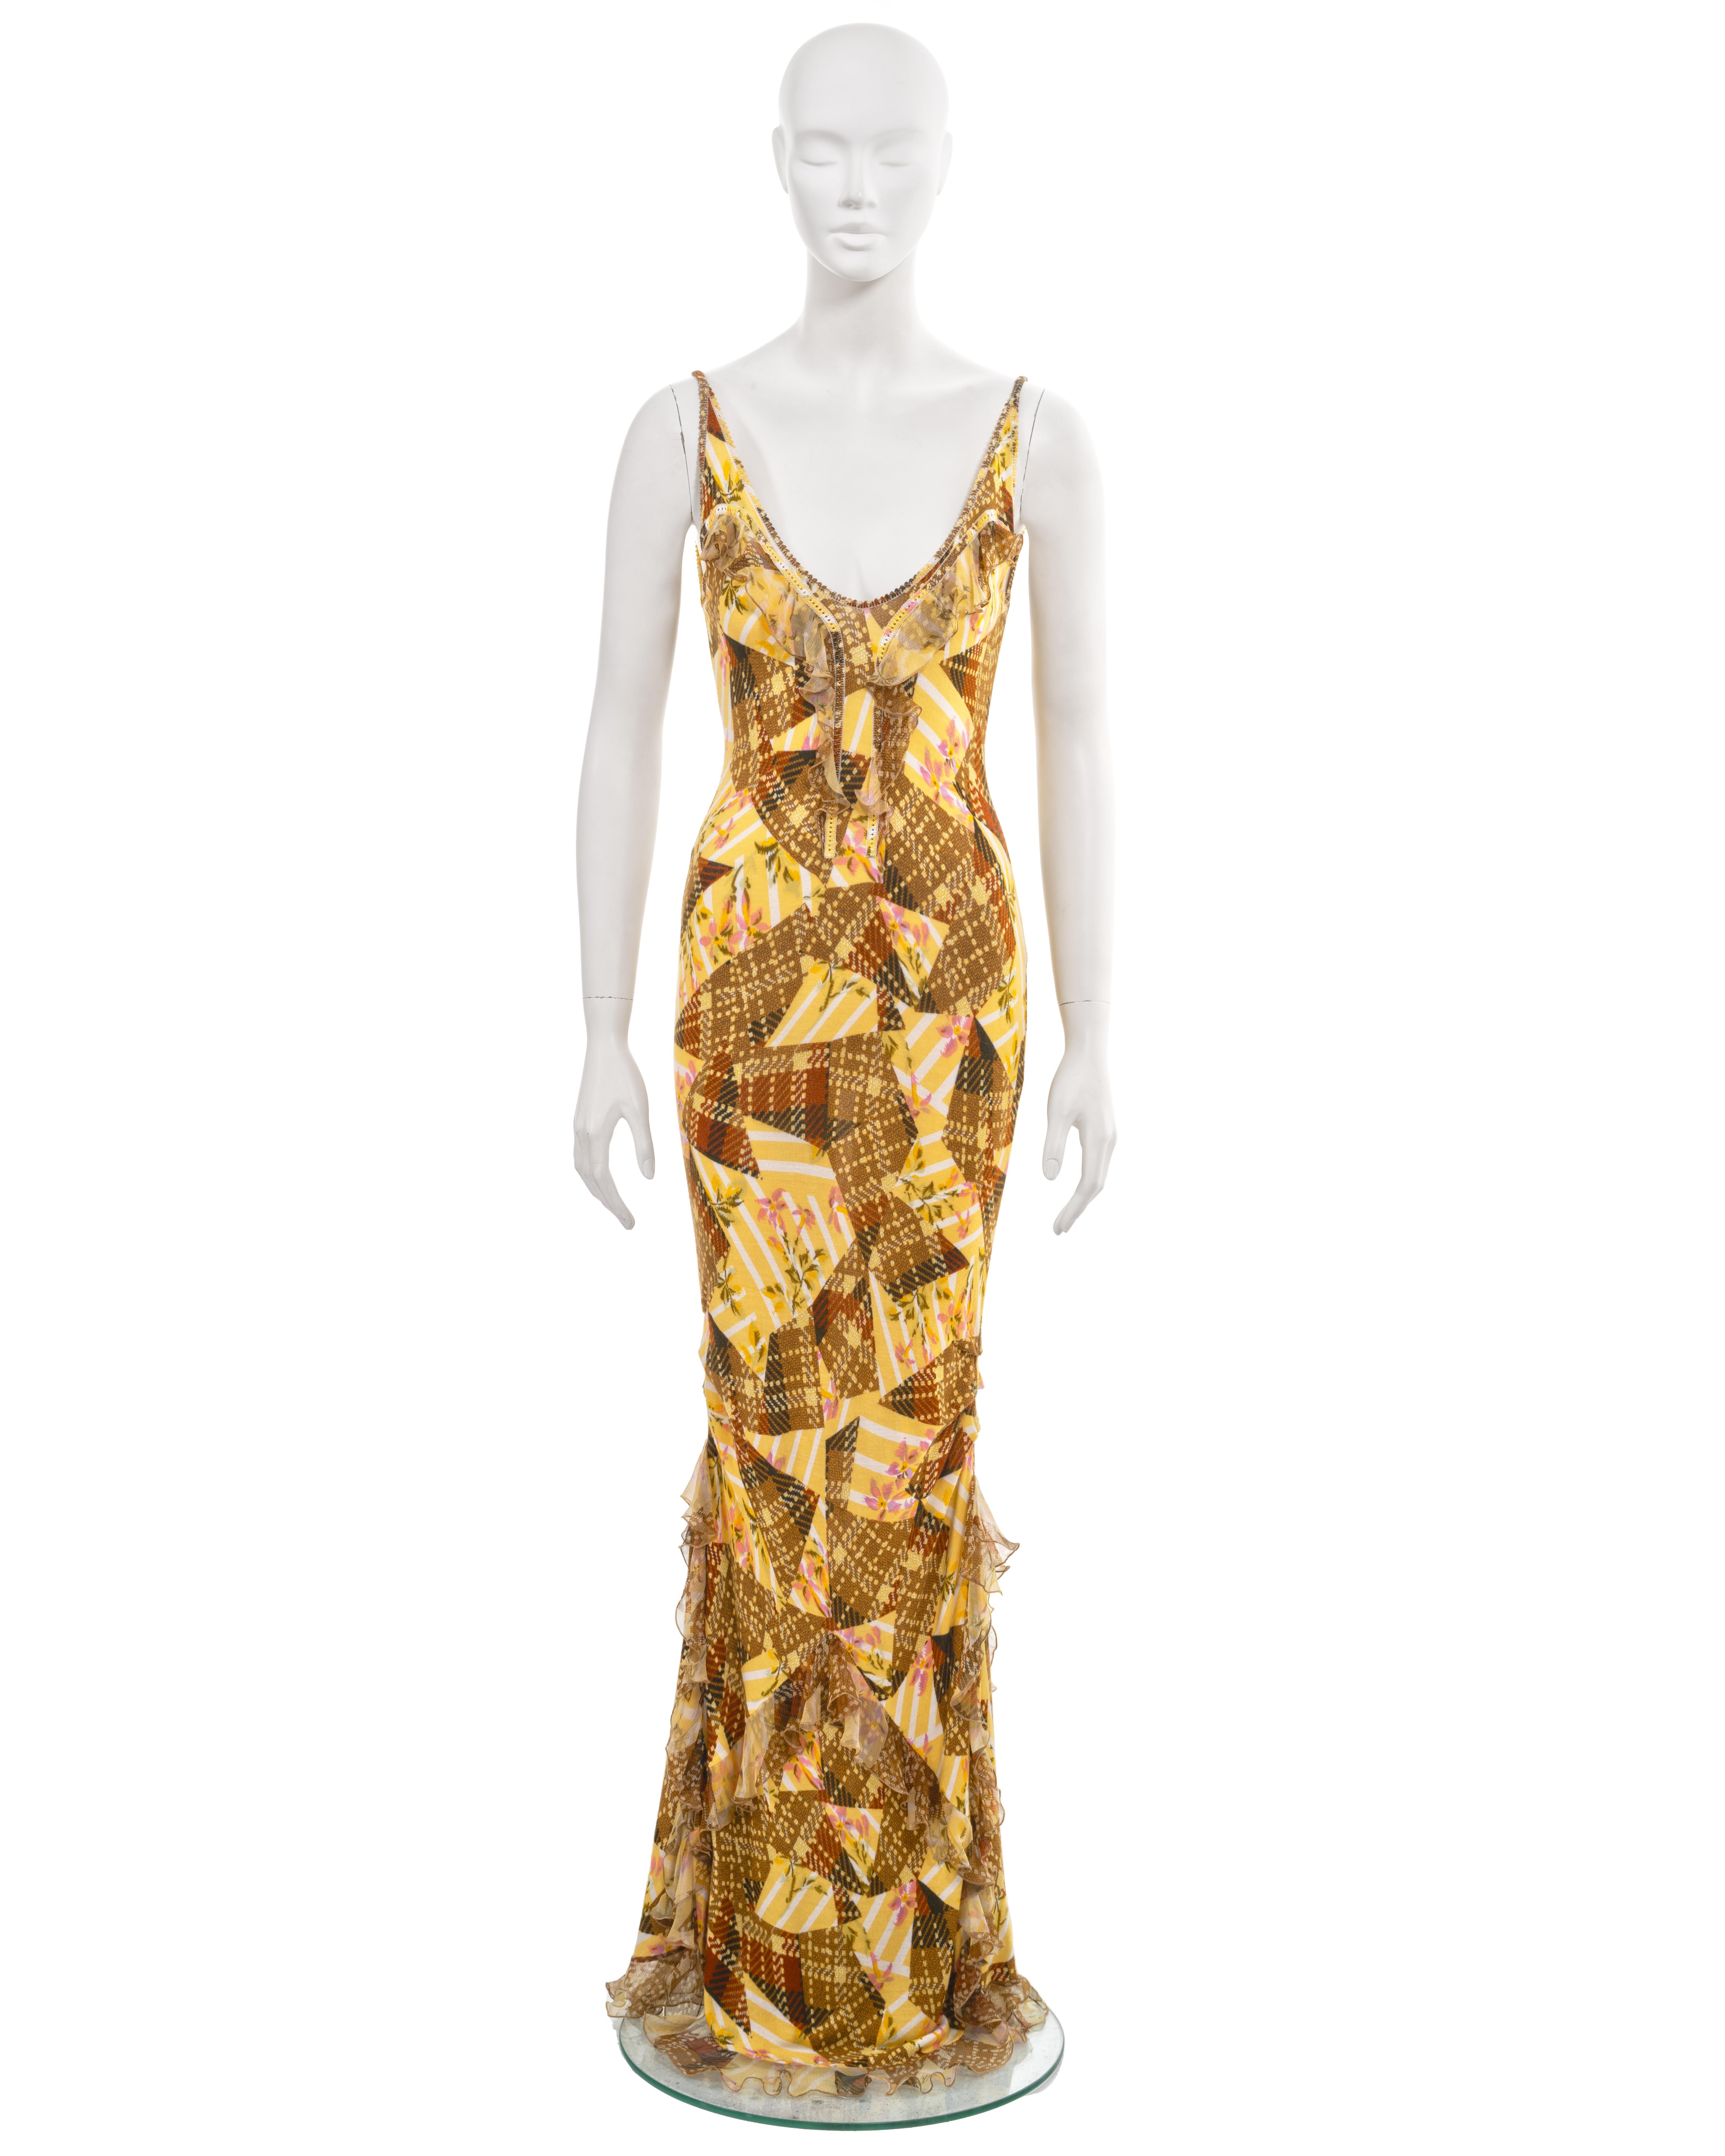 ▪ John Galliano knitted maxi dress
▪ Fall-Winter 2004
▪ Sold by One of a Kind Archive
▪Expertly crafted from knit cotton jersey, showcasing an allover woven patchwork print featuring tartan and floral squares in delightful shades of yellow, brown,